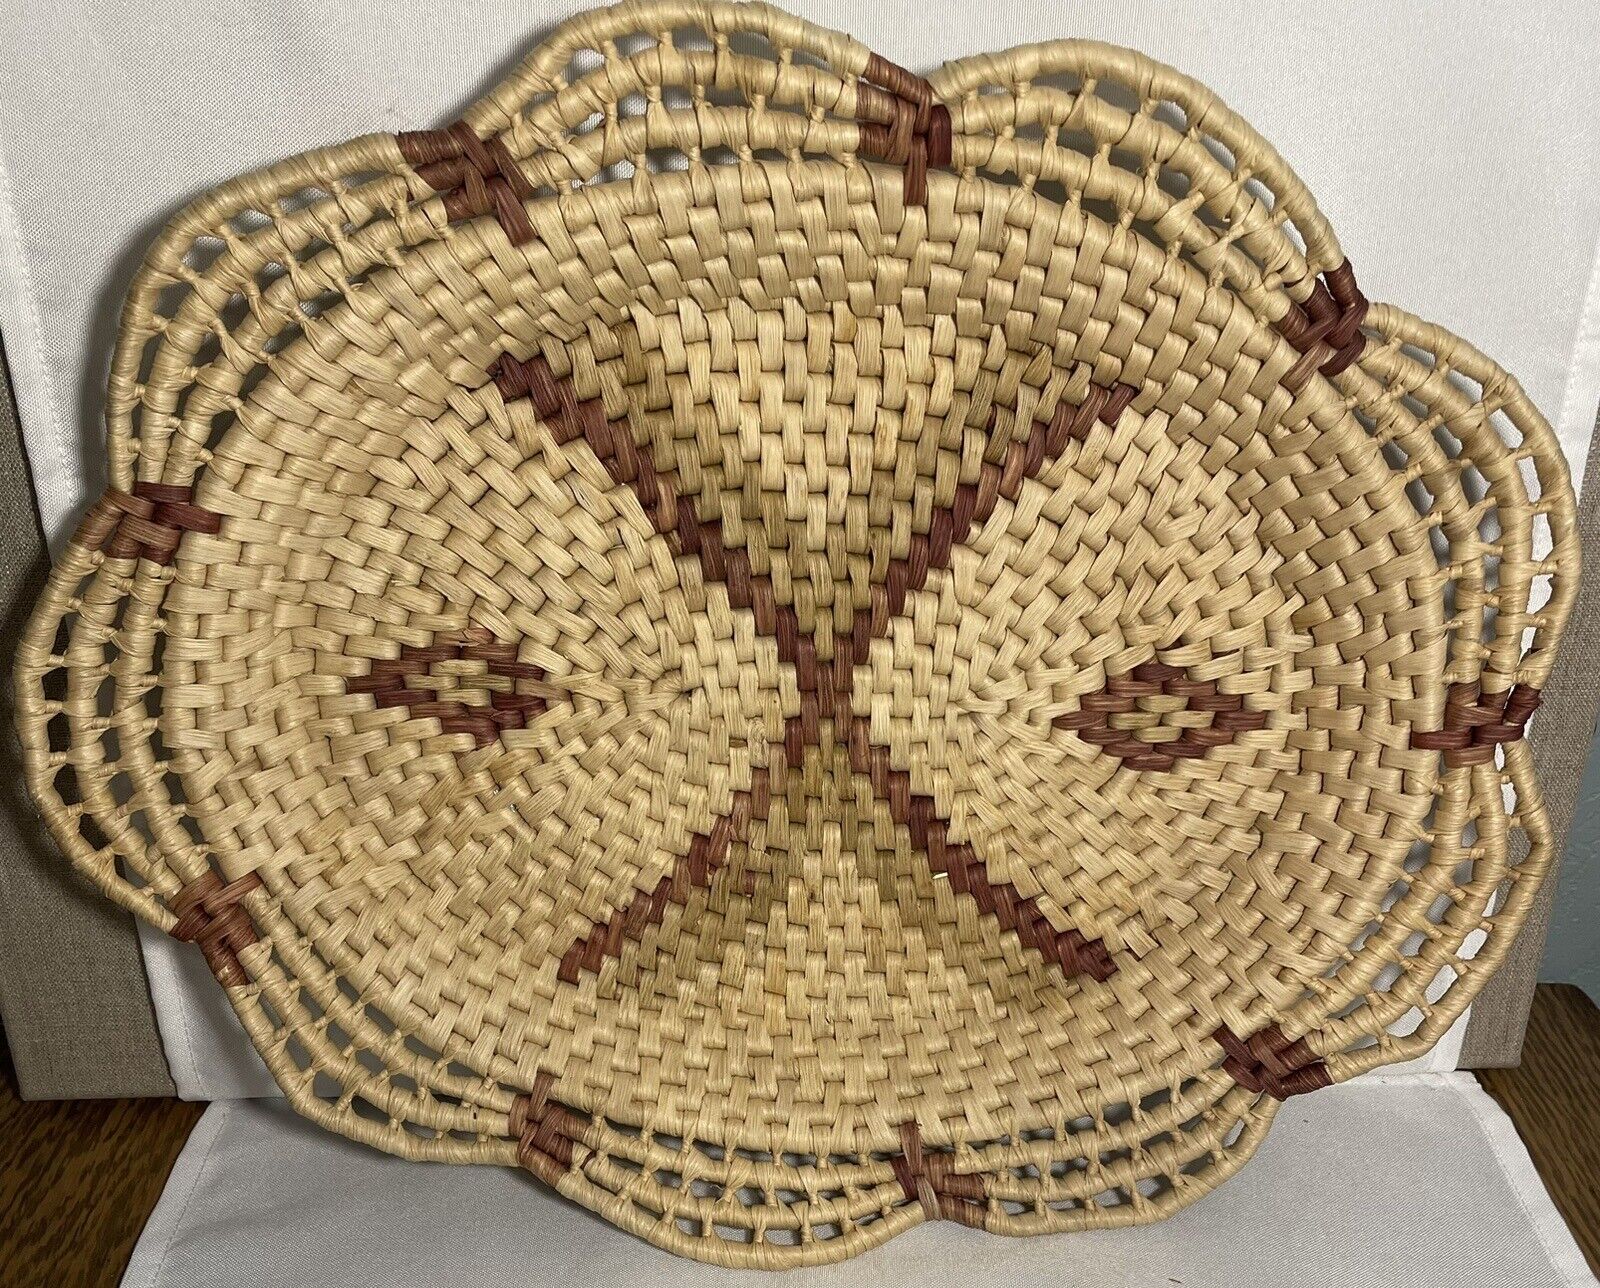 Seagrass Hand Woven Coil Basket Oval Shaped Platter Style Wall Home Decor 